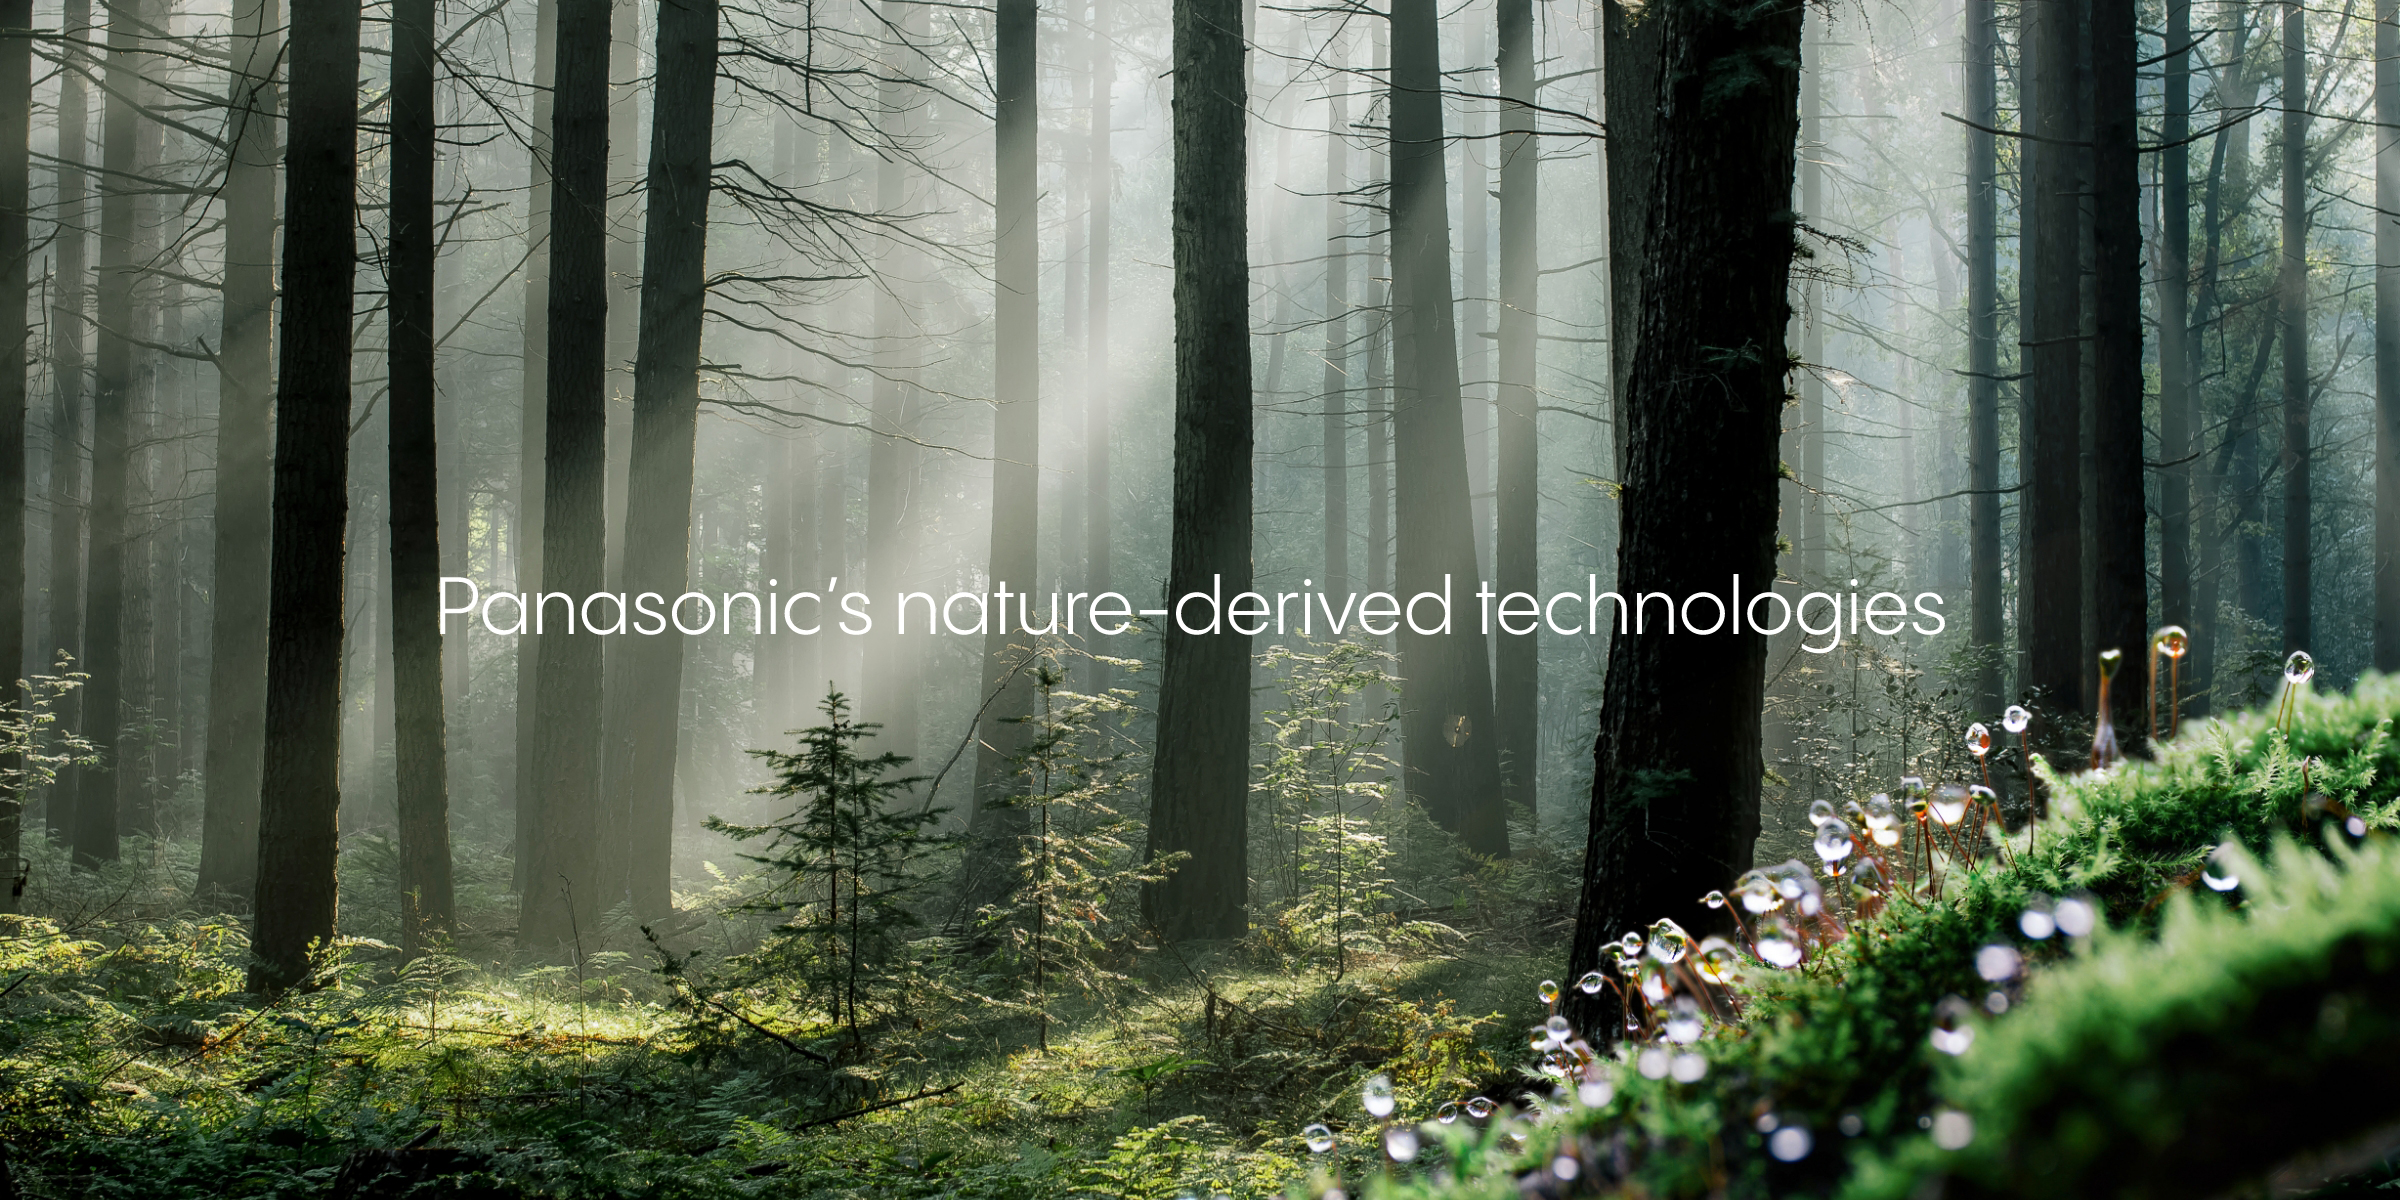 Panasonic's nature-derived technologies for cleaner air